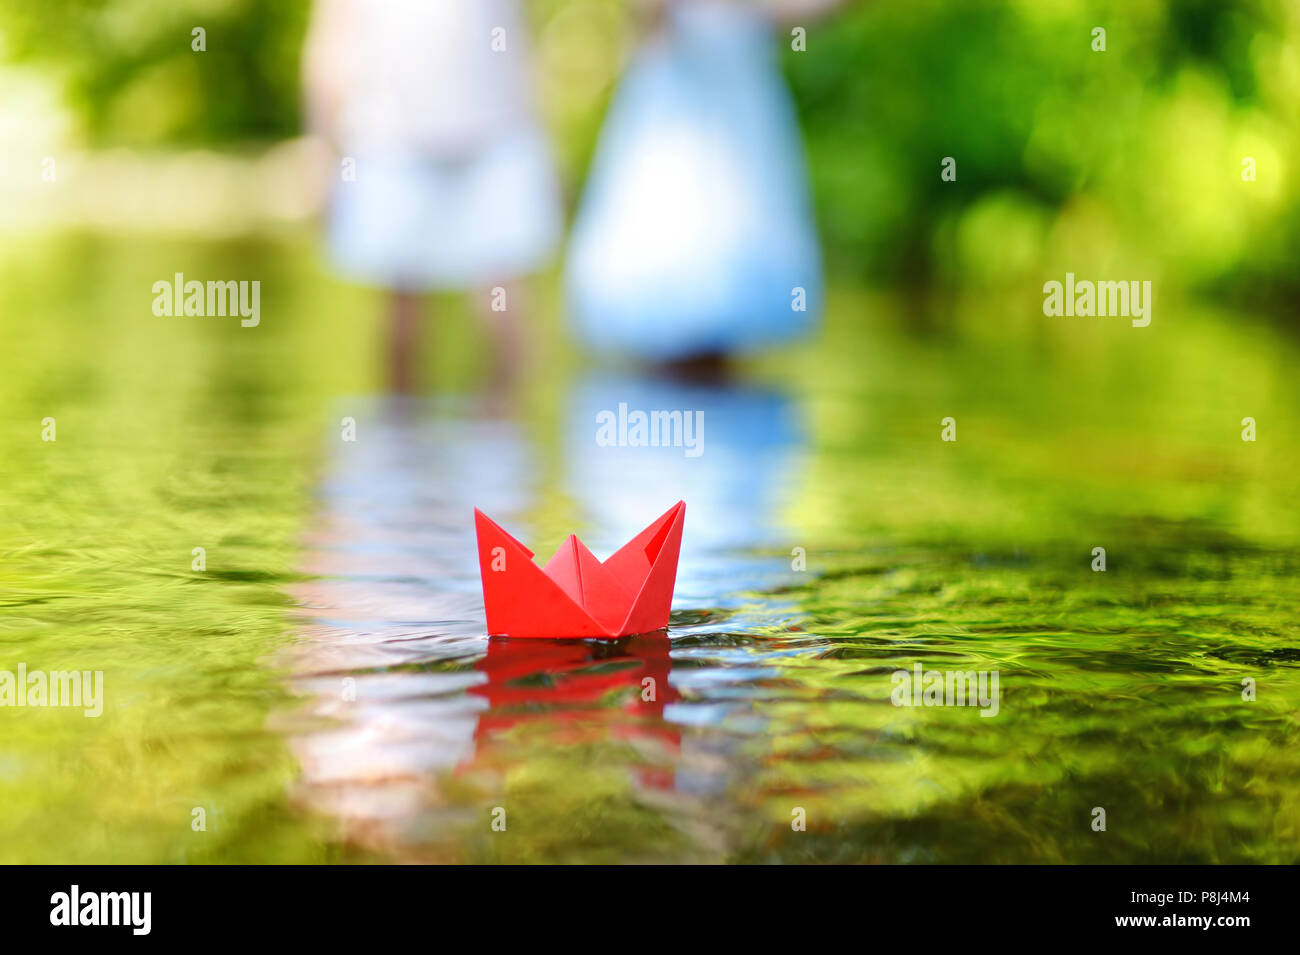 Red paper boat floating on a river Stock Photo